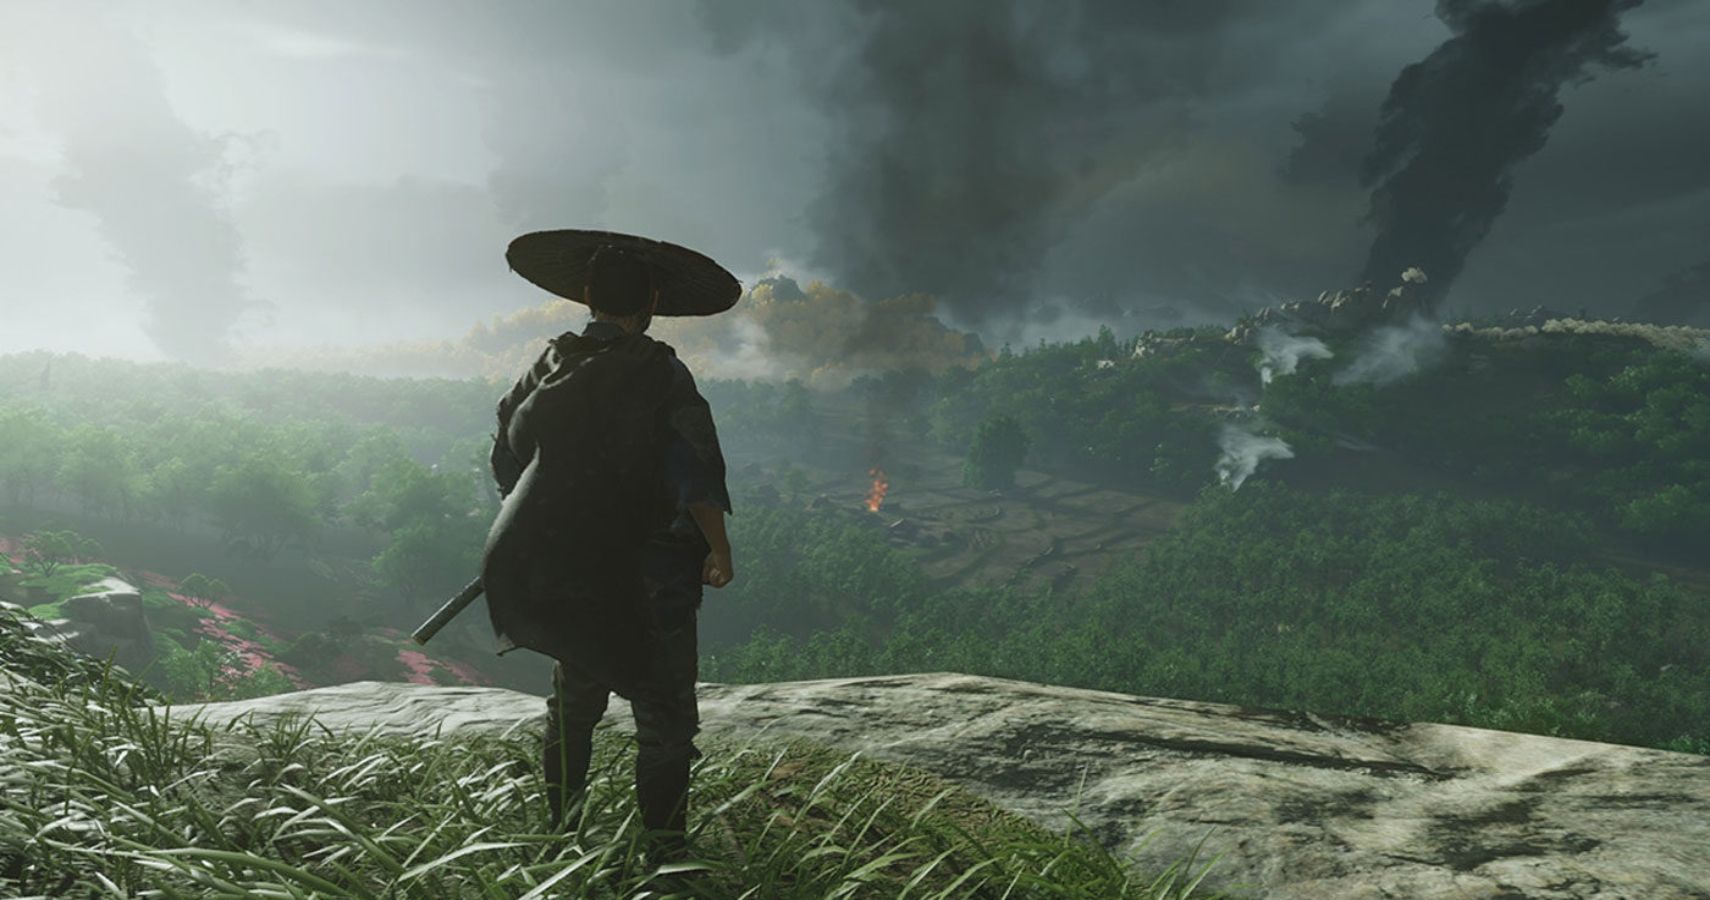 Ghost Of Tsushima Lead Environment Artist Reveals Process Behind Impressive Visuals [VIDEO]